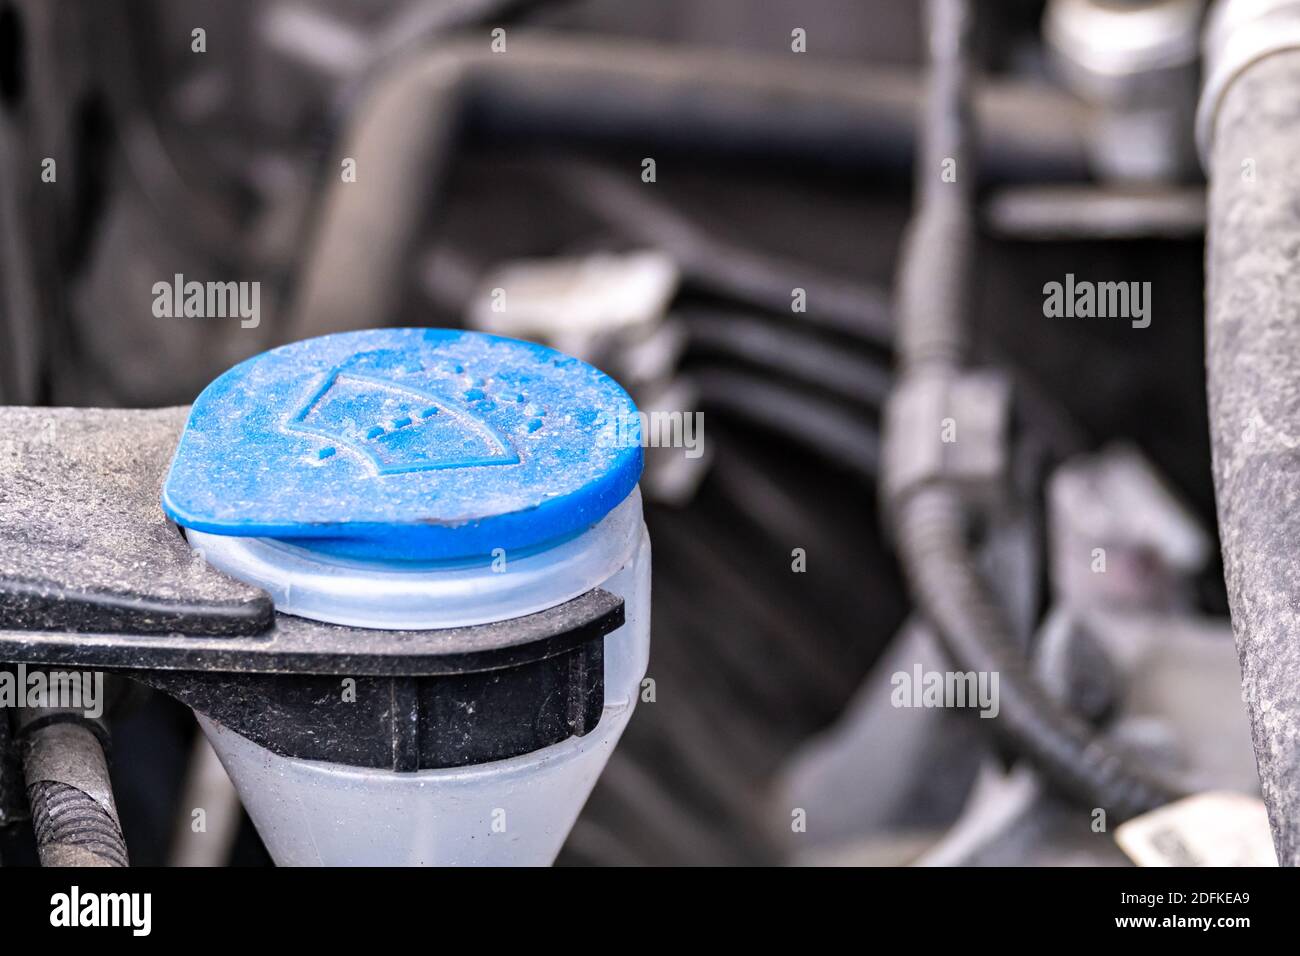 A close-up side view of a blue plastic cap covering a tube for filling a windshield wiper fluid tank. Stock Photo